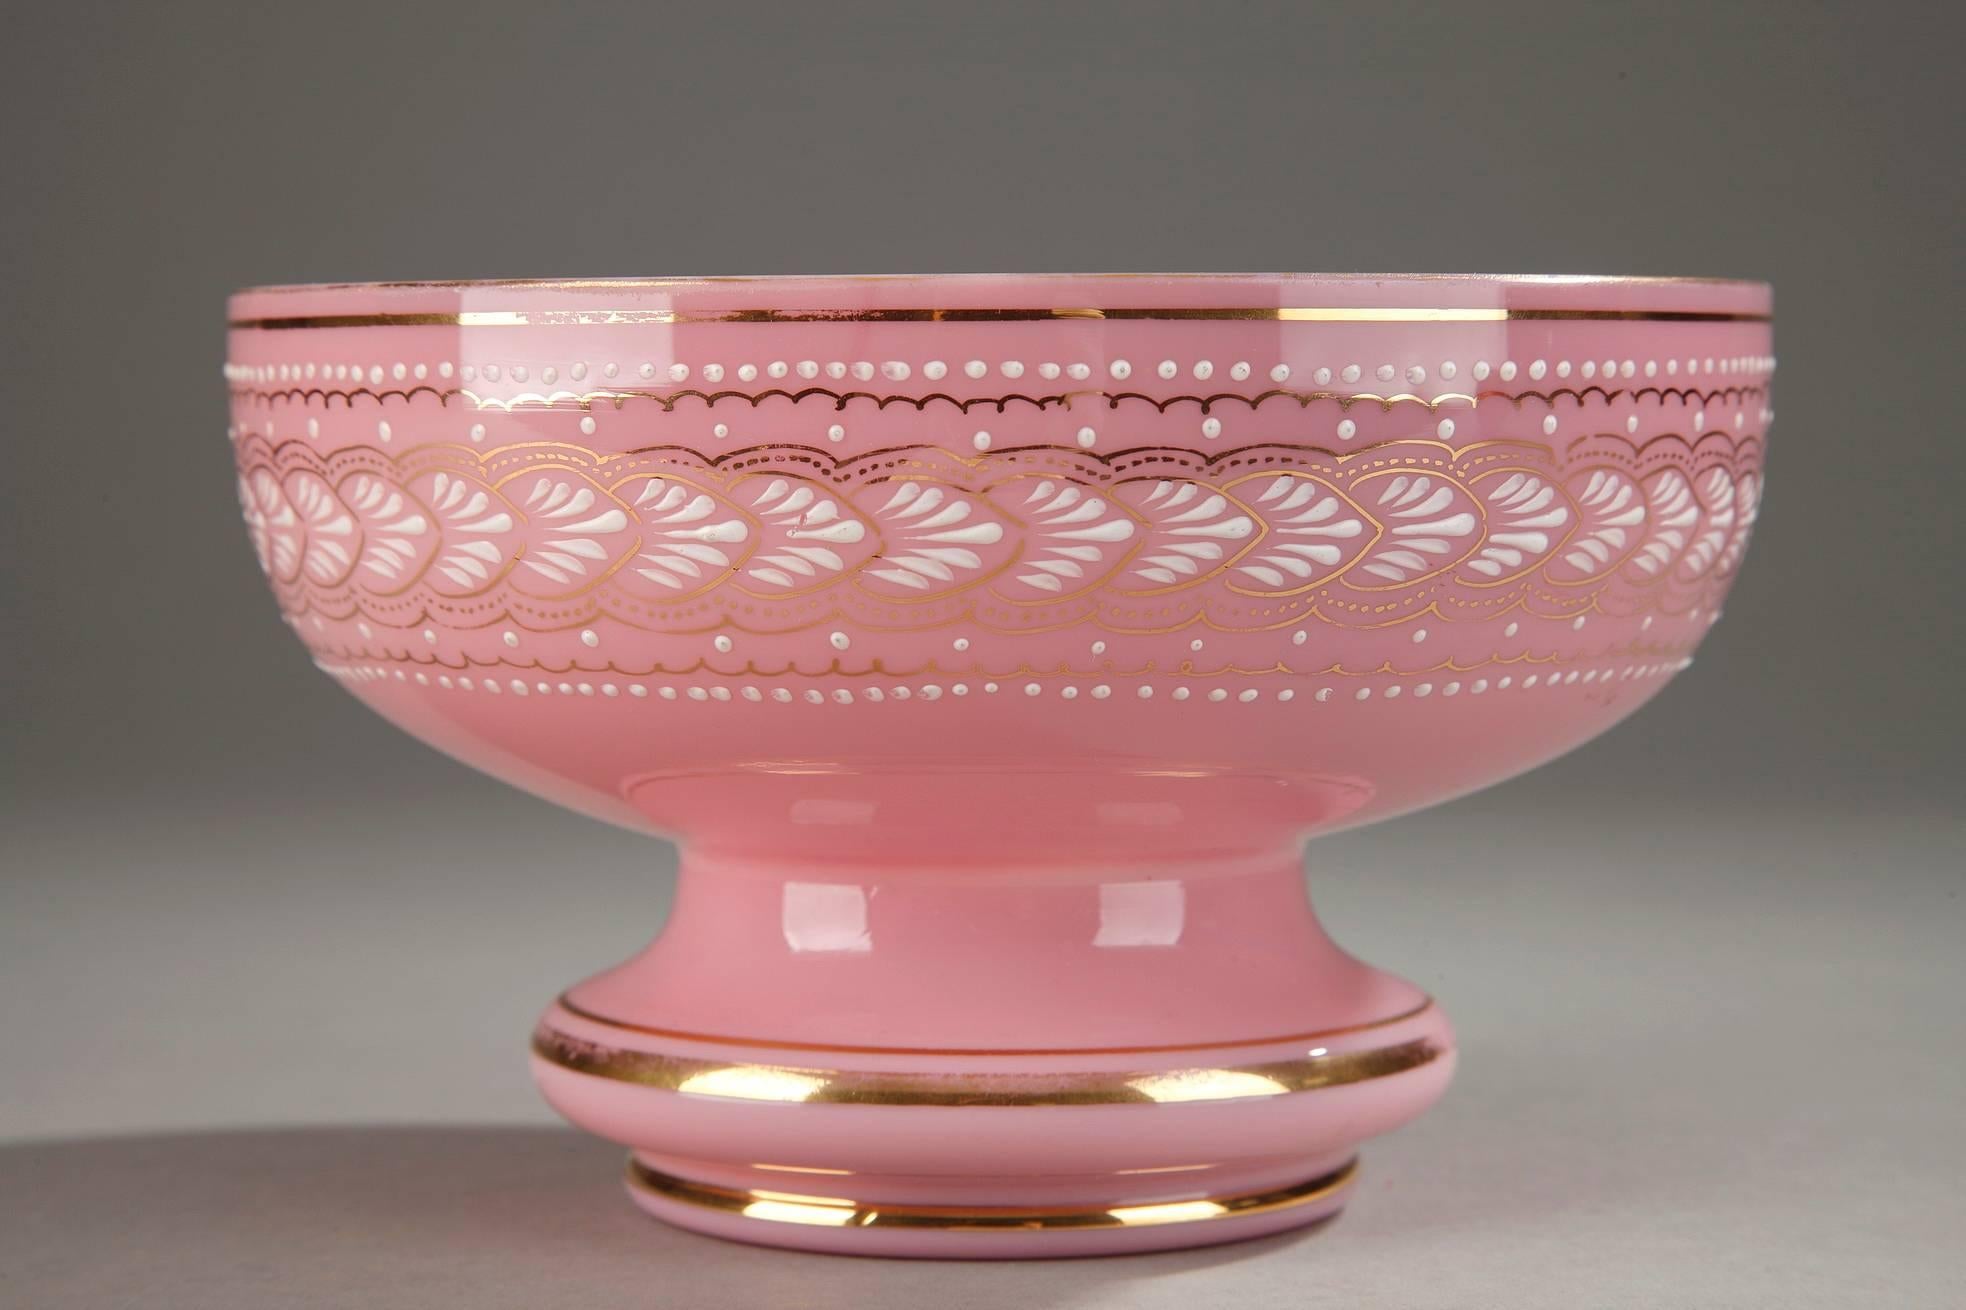 Pink and white opaline bowl decorated on the exterior with a frieze of palmettes, small white dots, and thin, gold embellishments. It rests on a short, pedestal foot that is also accented with gold bands. The white enamel and gold decoration is an